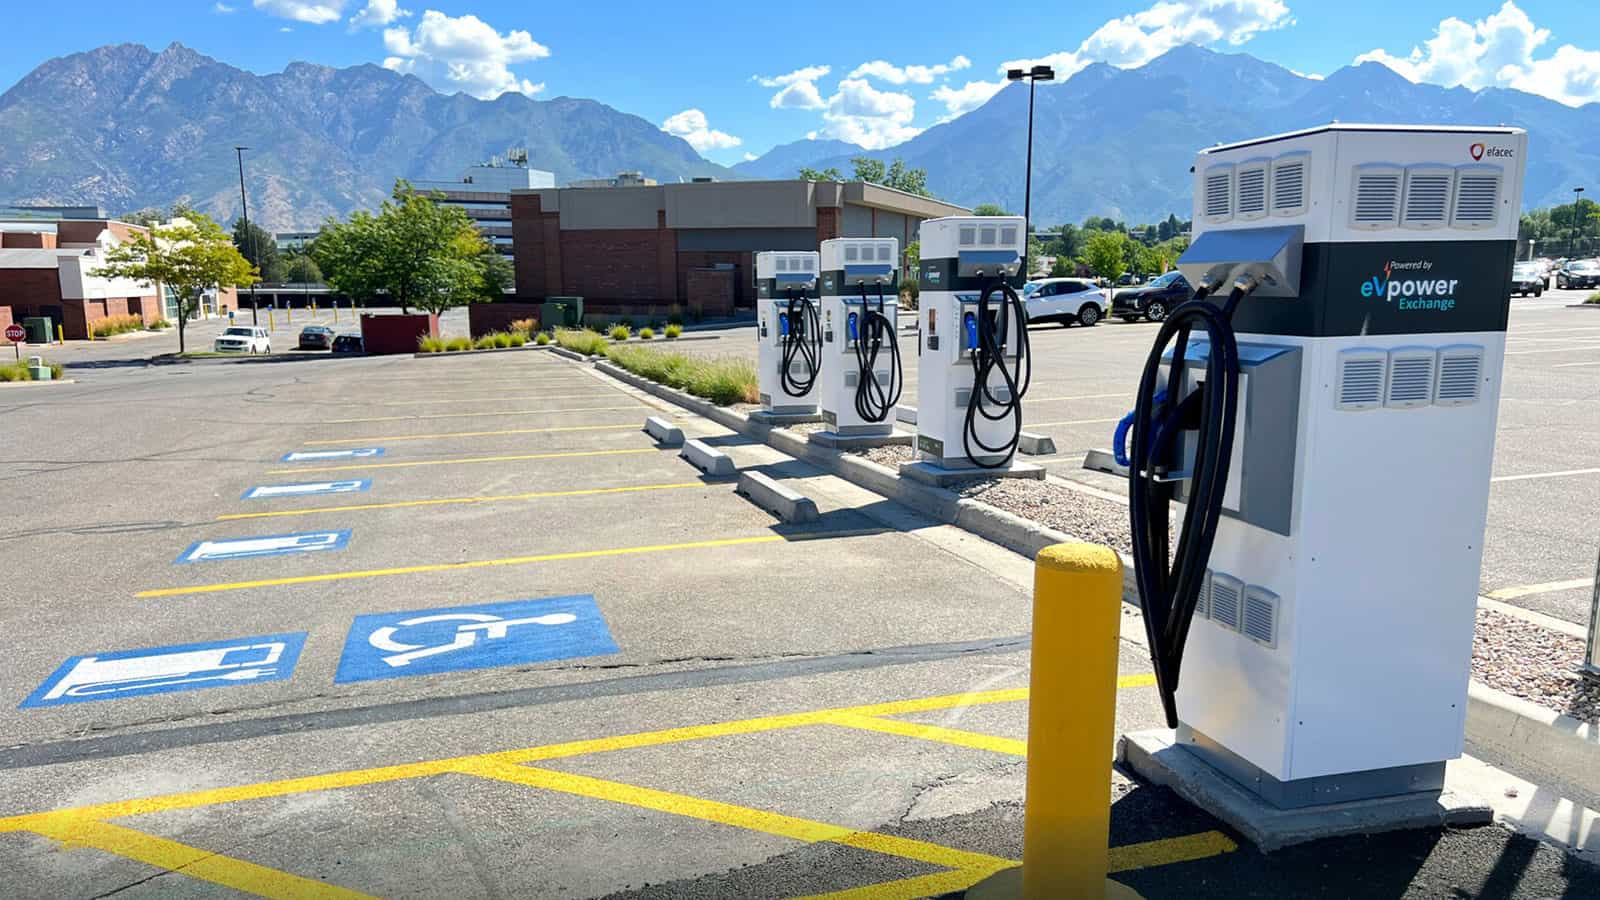 eVpower exchange charging station in a parking lot